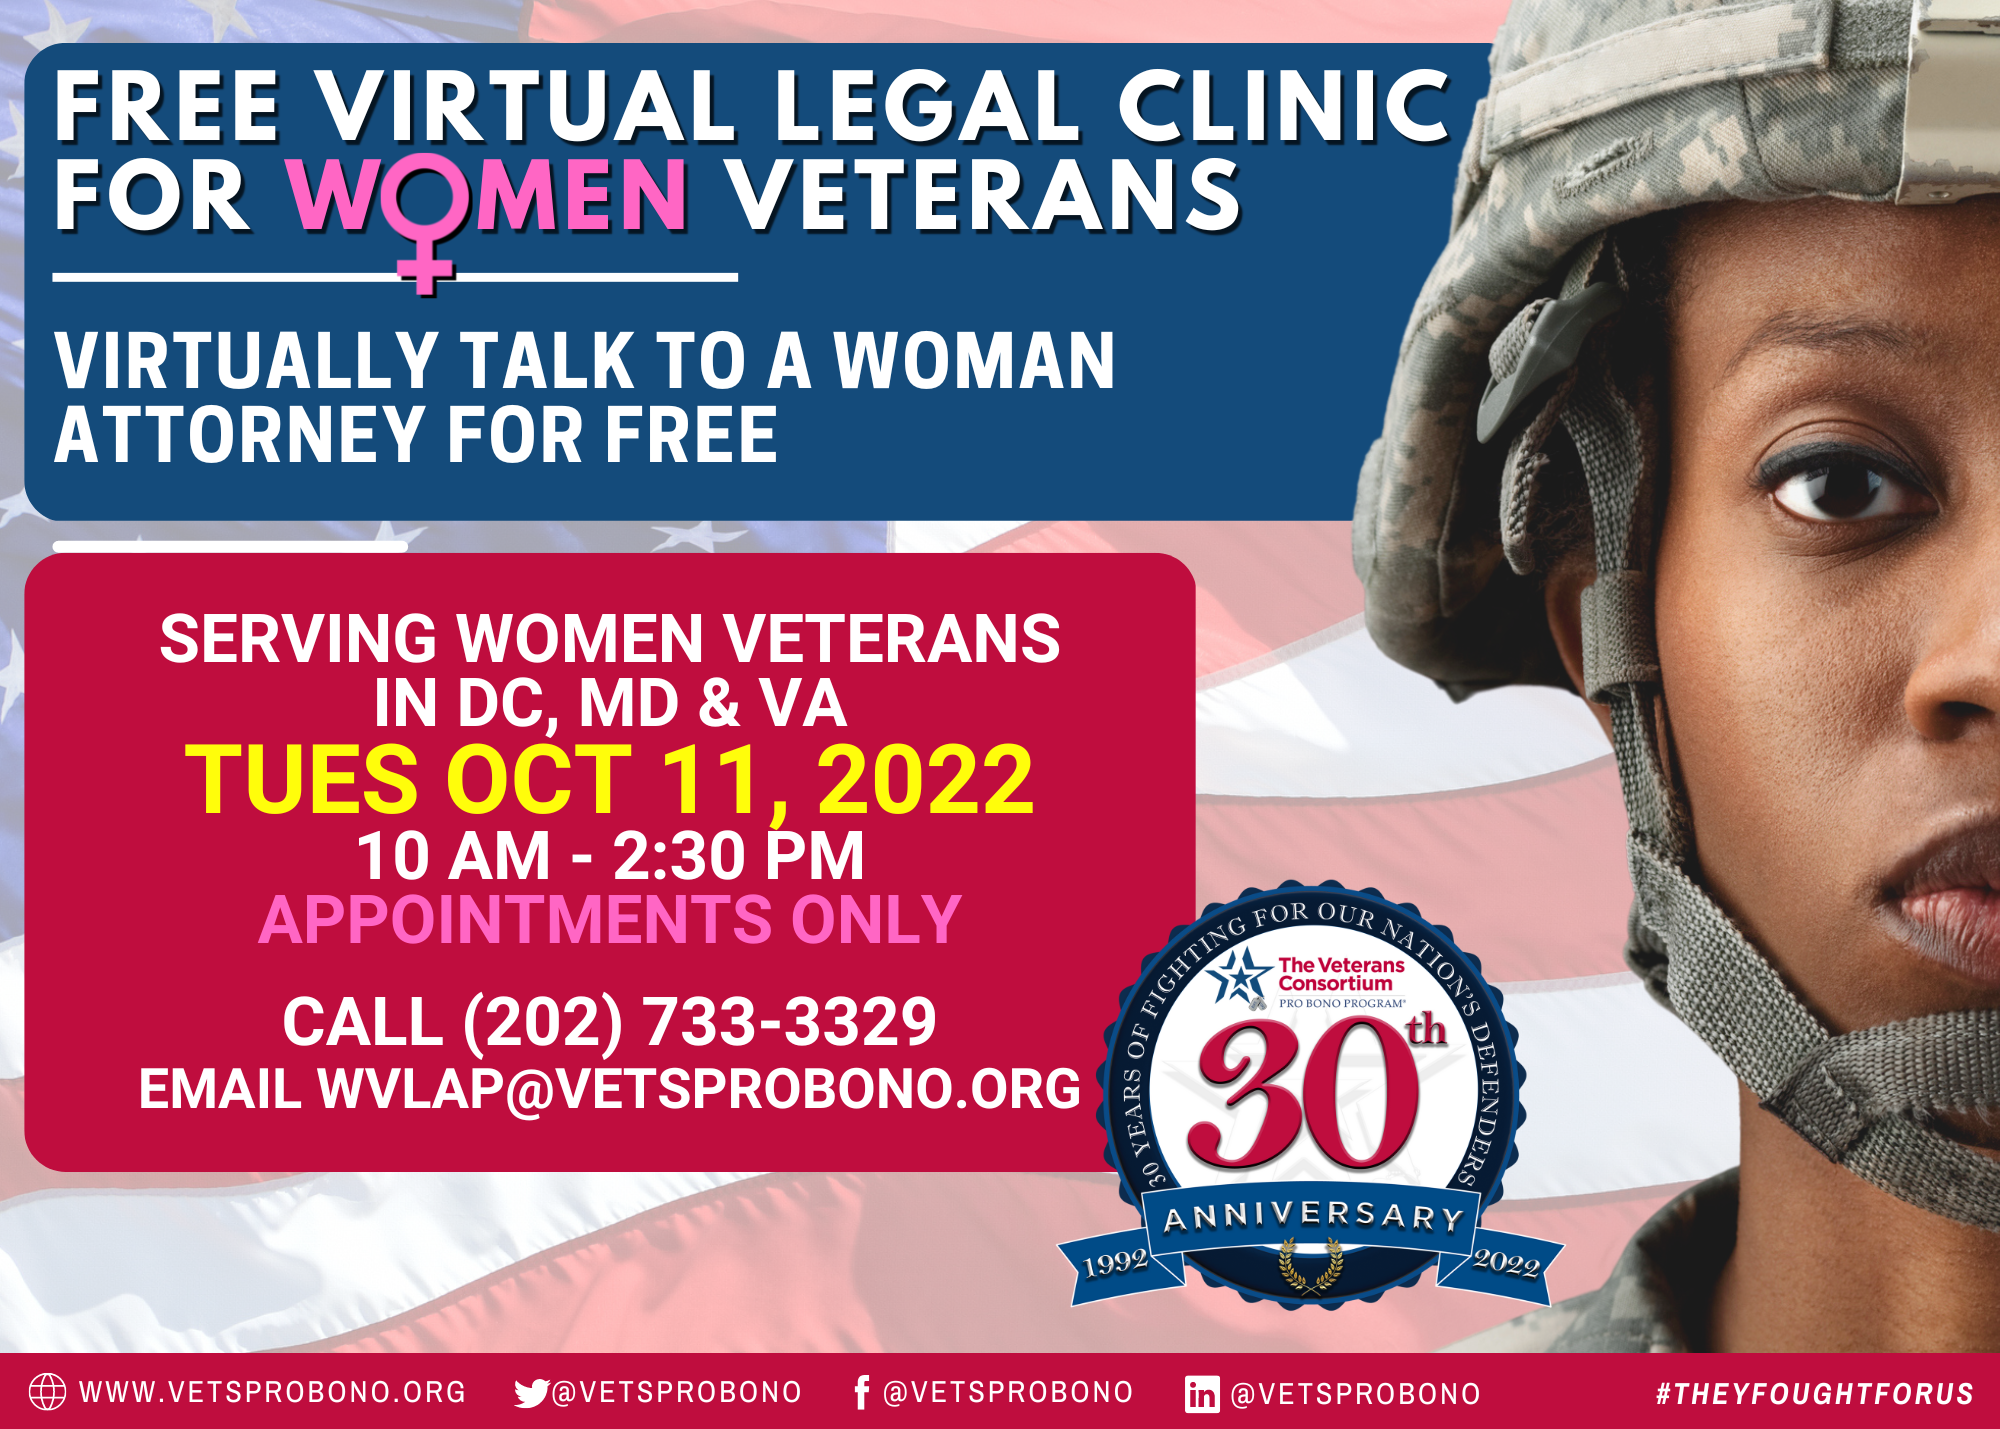 Free Virtual Legal Clinic for Women Veterans, Serving women veterans in DC, Maryland, and Virginia. Tuesday, May 10th, 2022, from 10AM to 2:30PM. Appointments only, call 202-733-3329